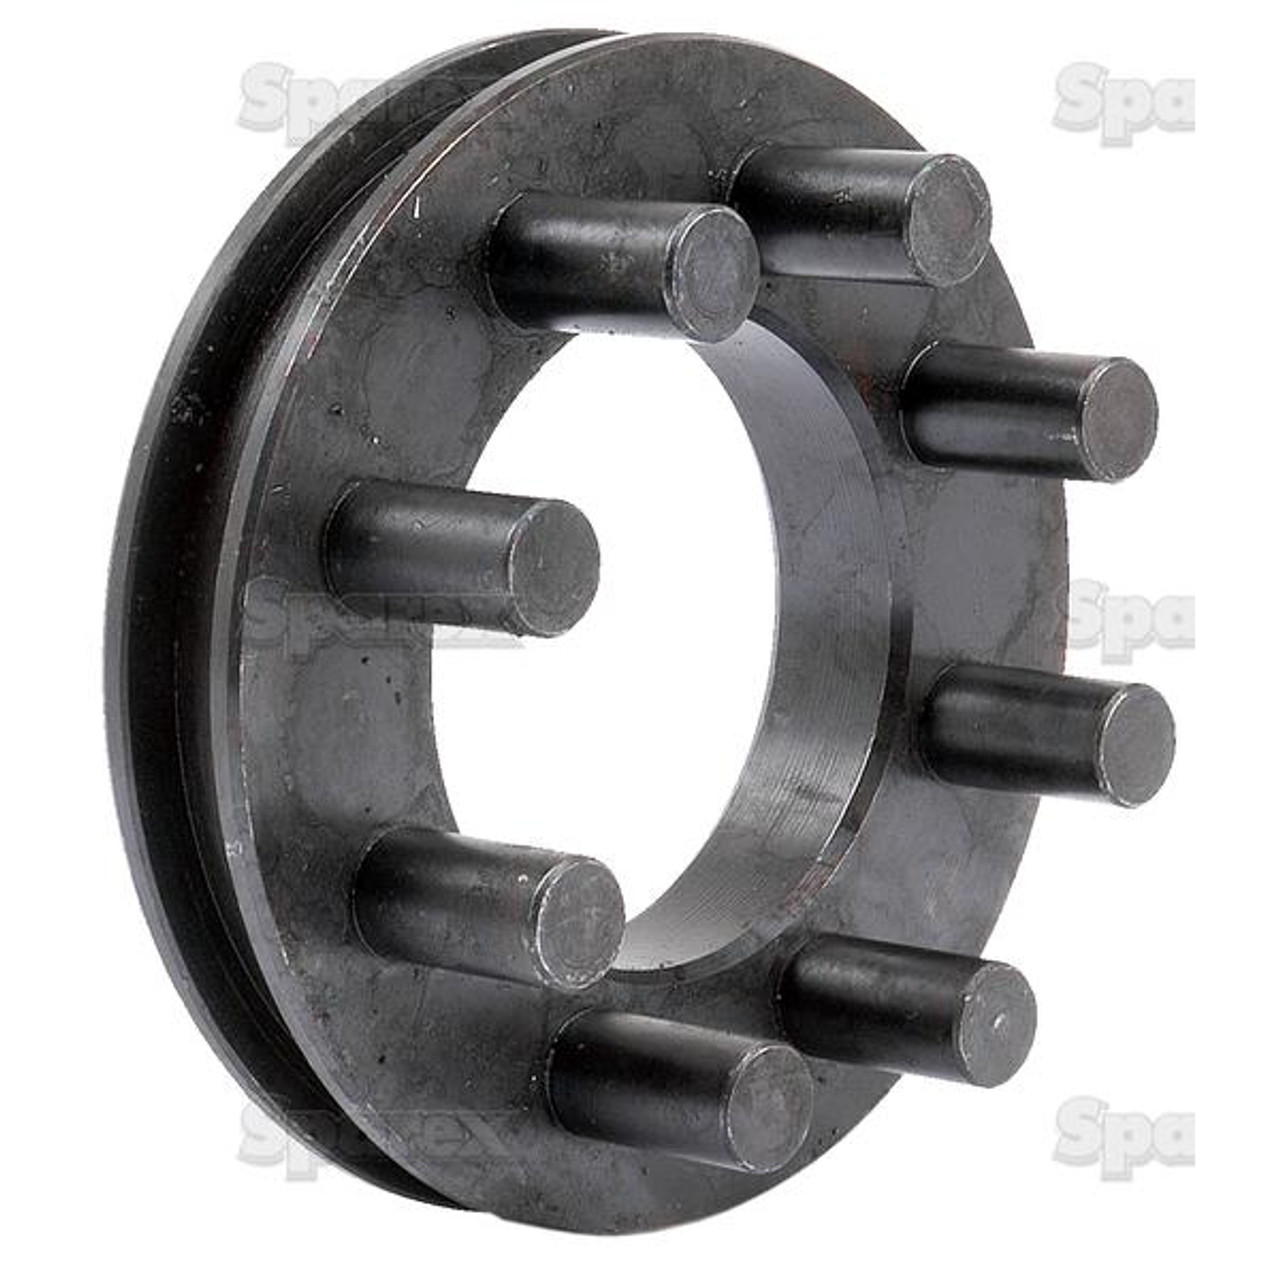 Tractor  COUPLING , Part Number S59133